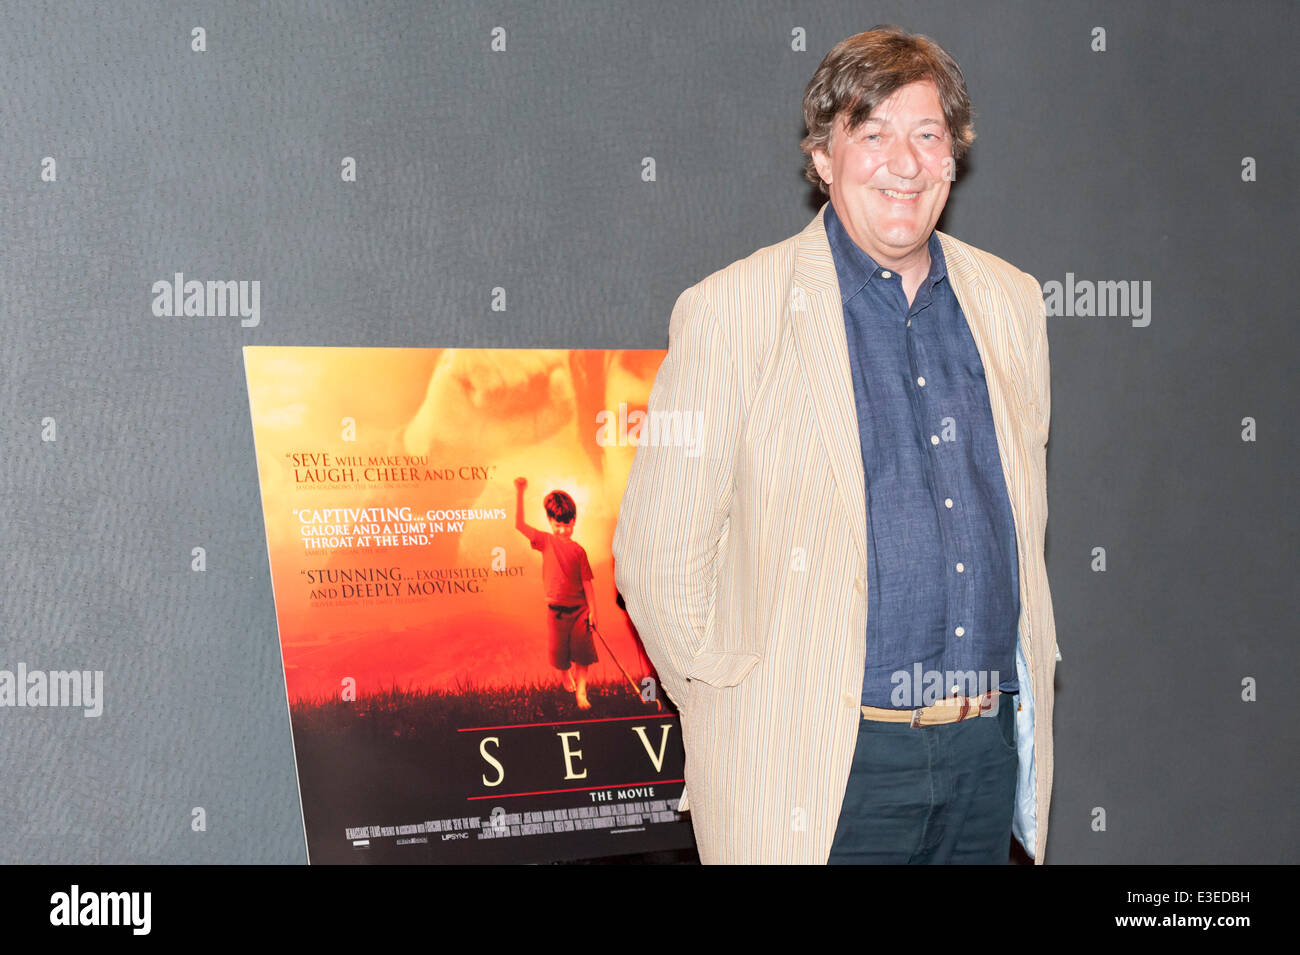 Empire Cinema, Leicester Square, London, UK. 23rd June 2014. Cast and celebrities attend the movie premiere “Seve” which opened at the Empire Cinema in Leicester Square, London. The motion picture tells the story of Seve Ballesteros who fought against adversity to become one of the most spectacular and charismatic golfers to ever play the game. Pictured: STEPHEN FRY (actor). Credit:  Lee Thomas/Alamy Live News Stock Photo